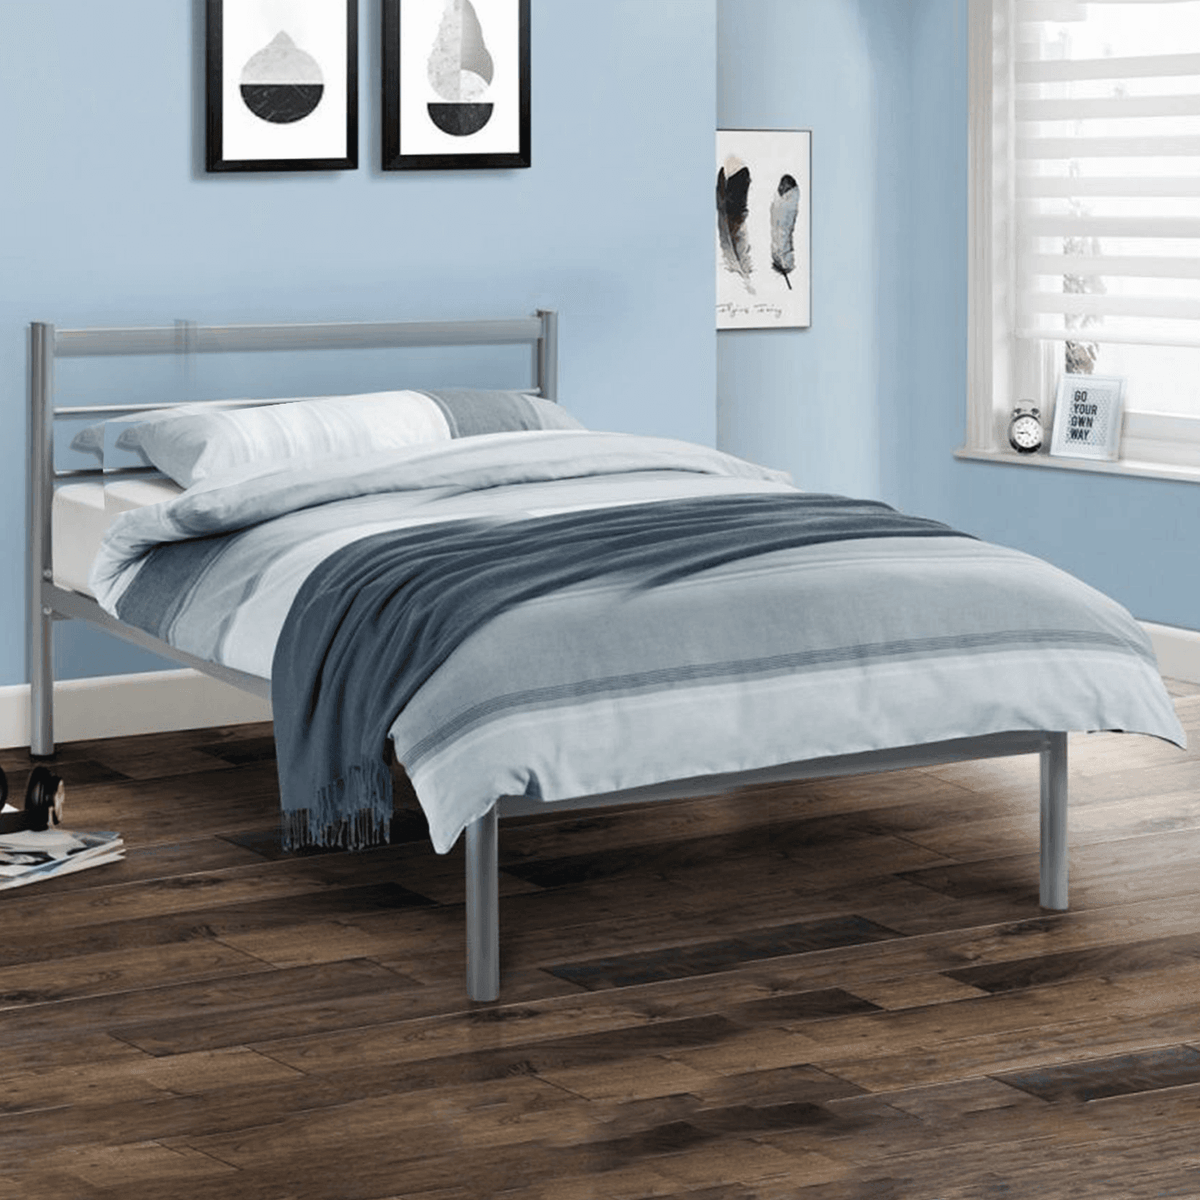 Alpen Silber Metal Double Bed Frame